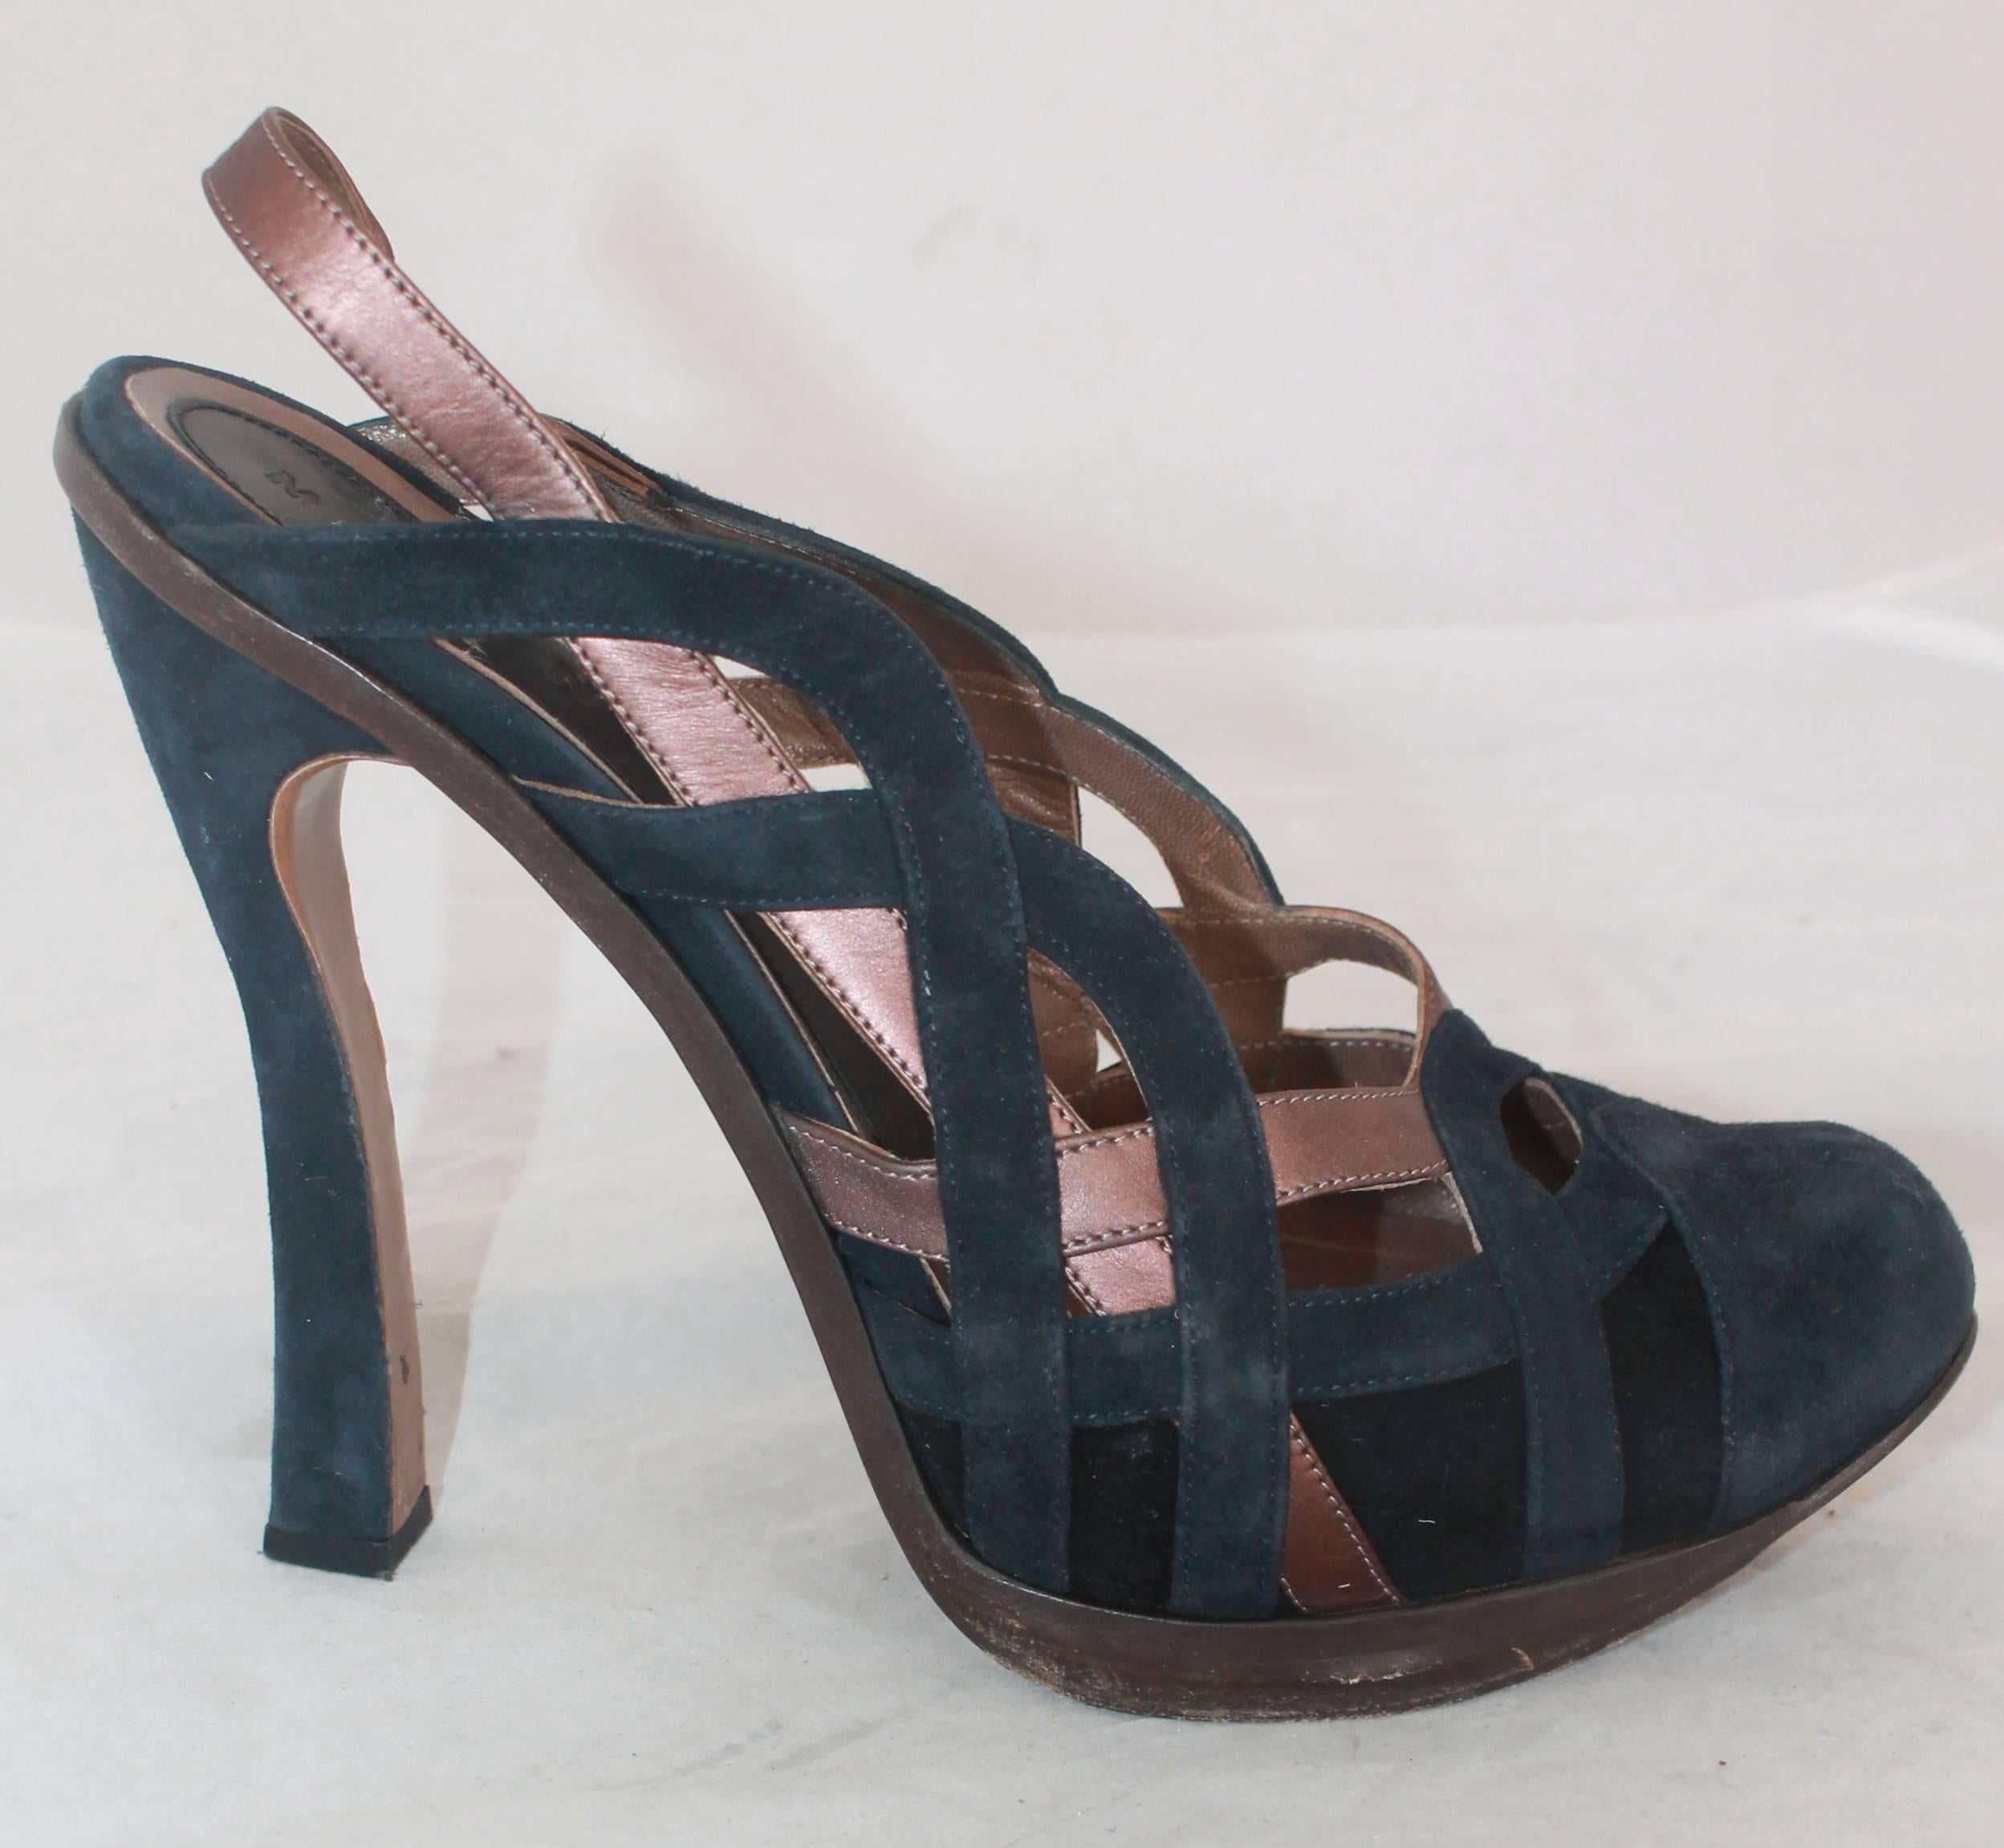 Marni Navy & Brown Woven Suede Pumps w/ Slingback Strap & Removable Bows - 40.  These lovely pumps are in good condition with only slight peeling and wear on the sole.  They feature a beautiful woven design, a front platform, a slingback strap, a